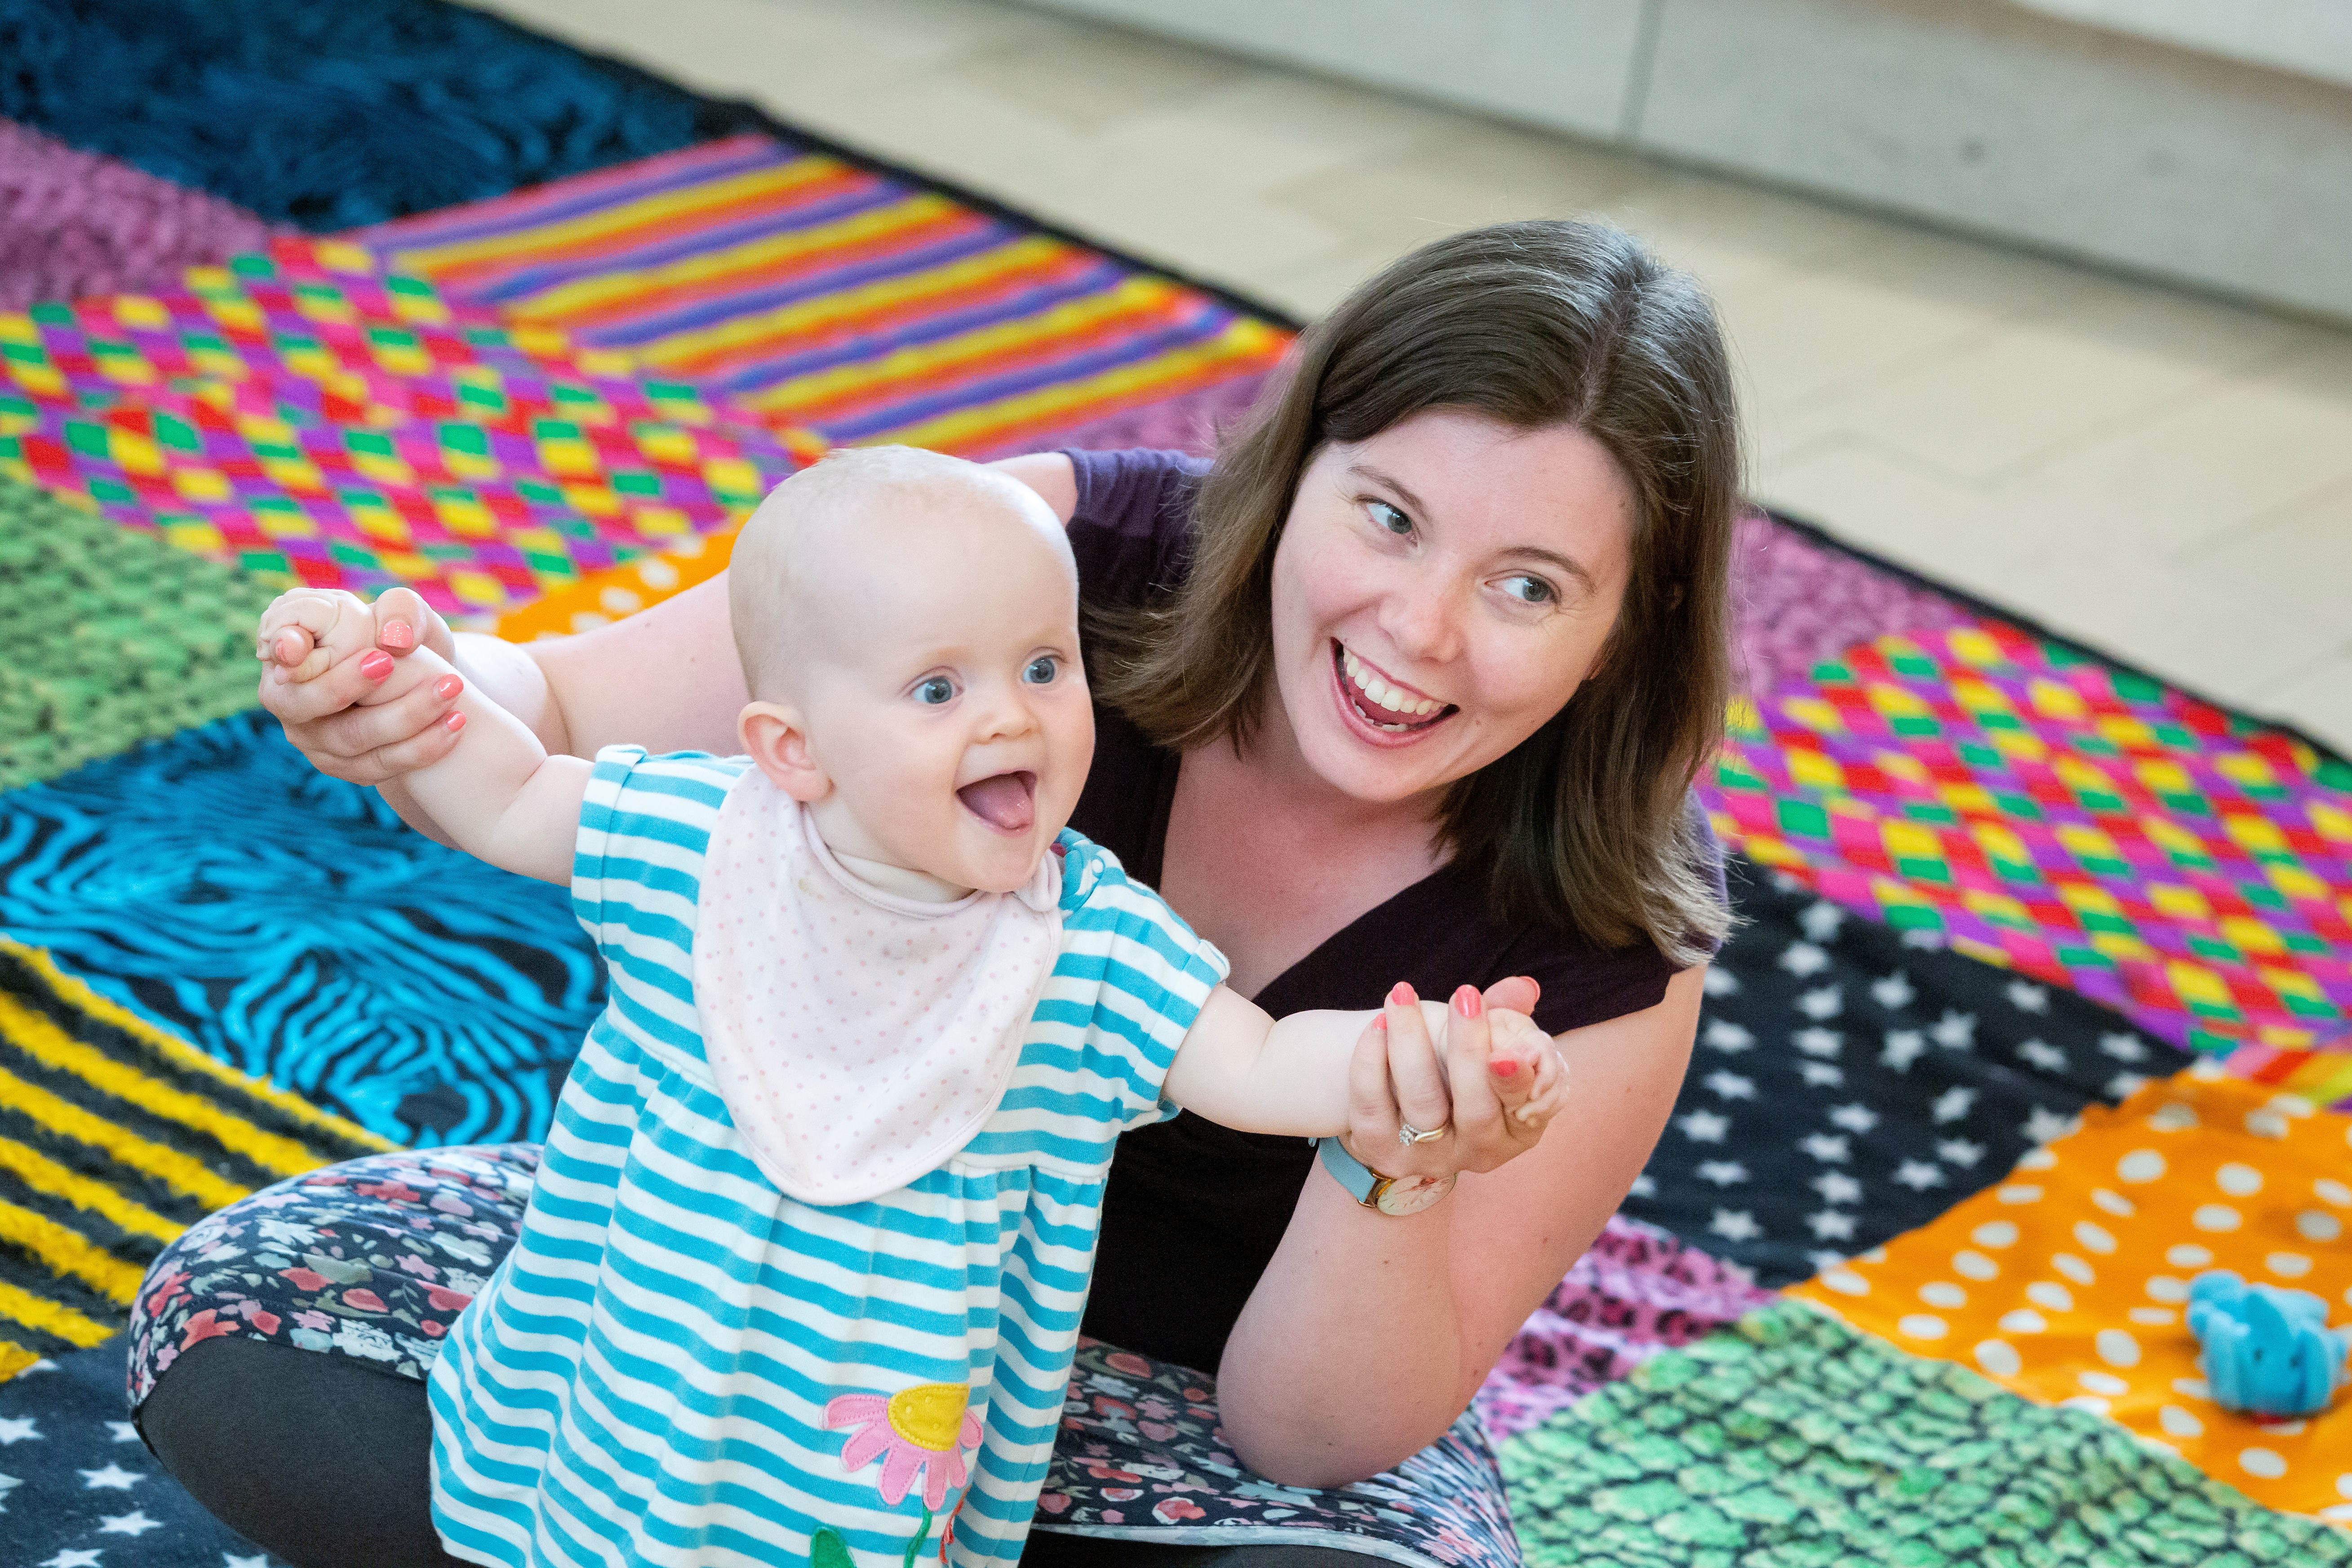 Woman and baby in arms sitting on the floor on a checked carpet.